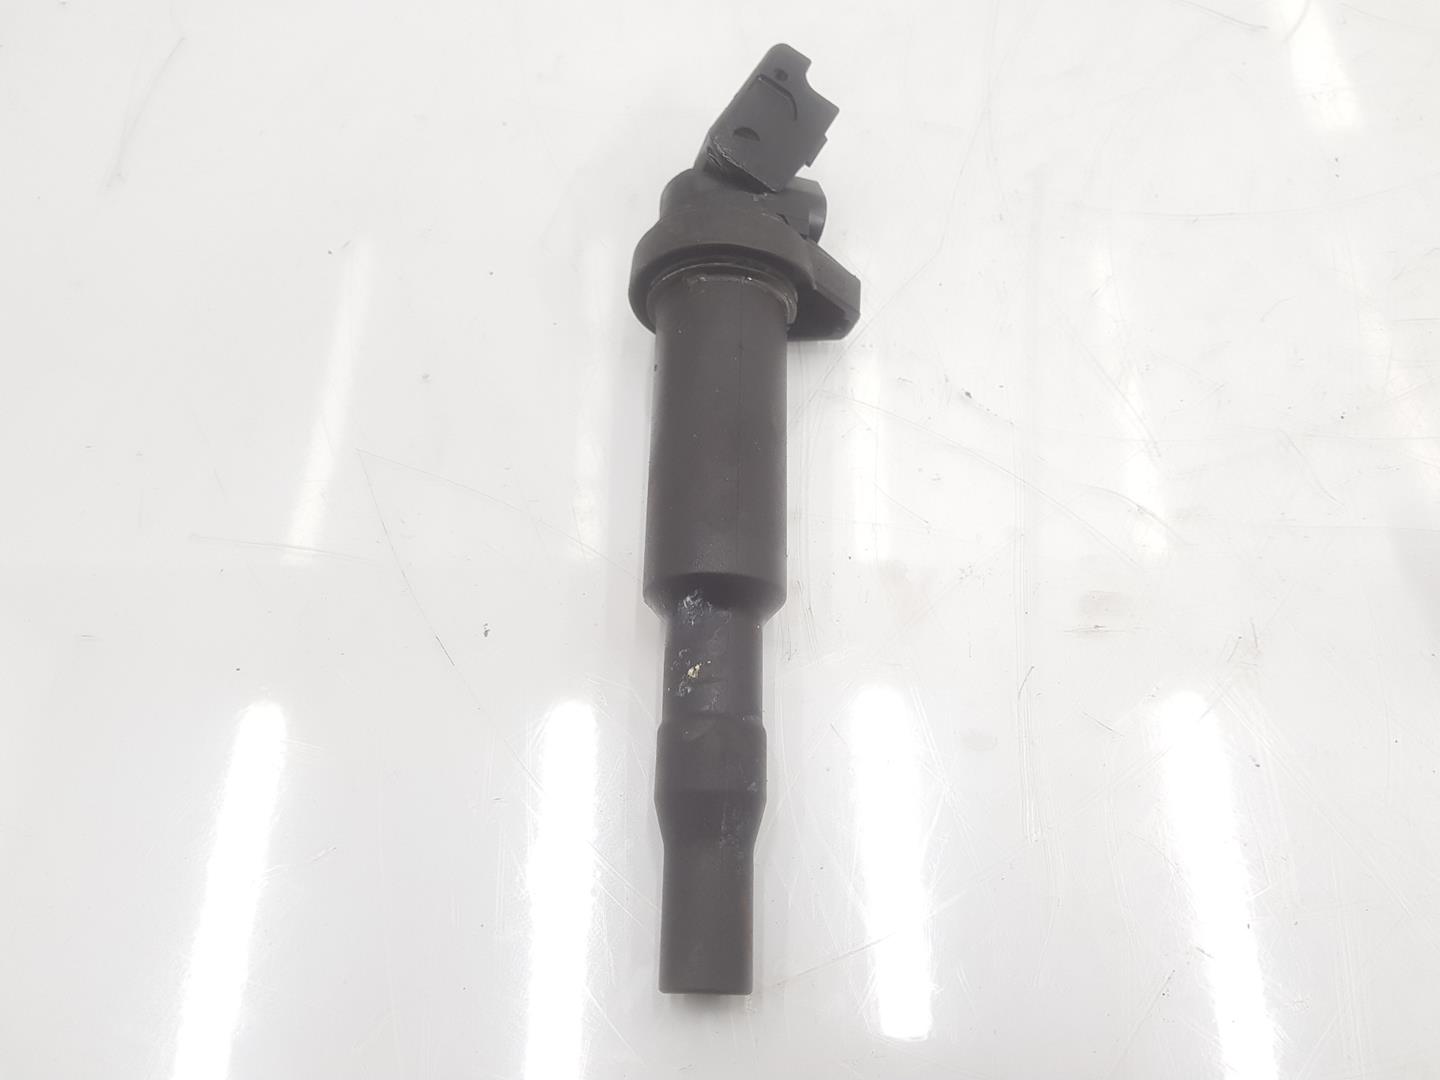 BMW 7 Series F01/F02 (2008-2015) High Voltage Ignition Coil 8611236, 12138611236, 1111AA 23536152